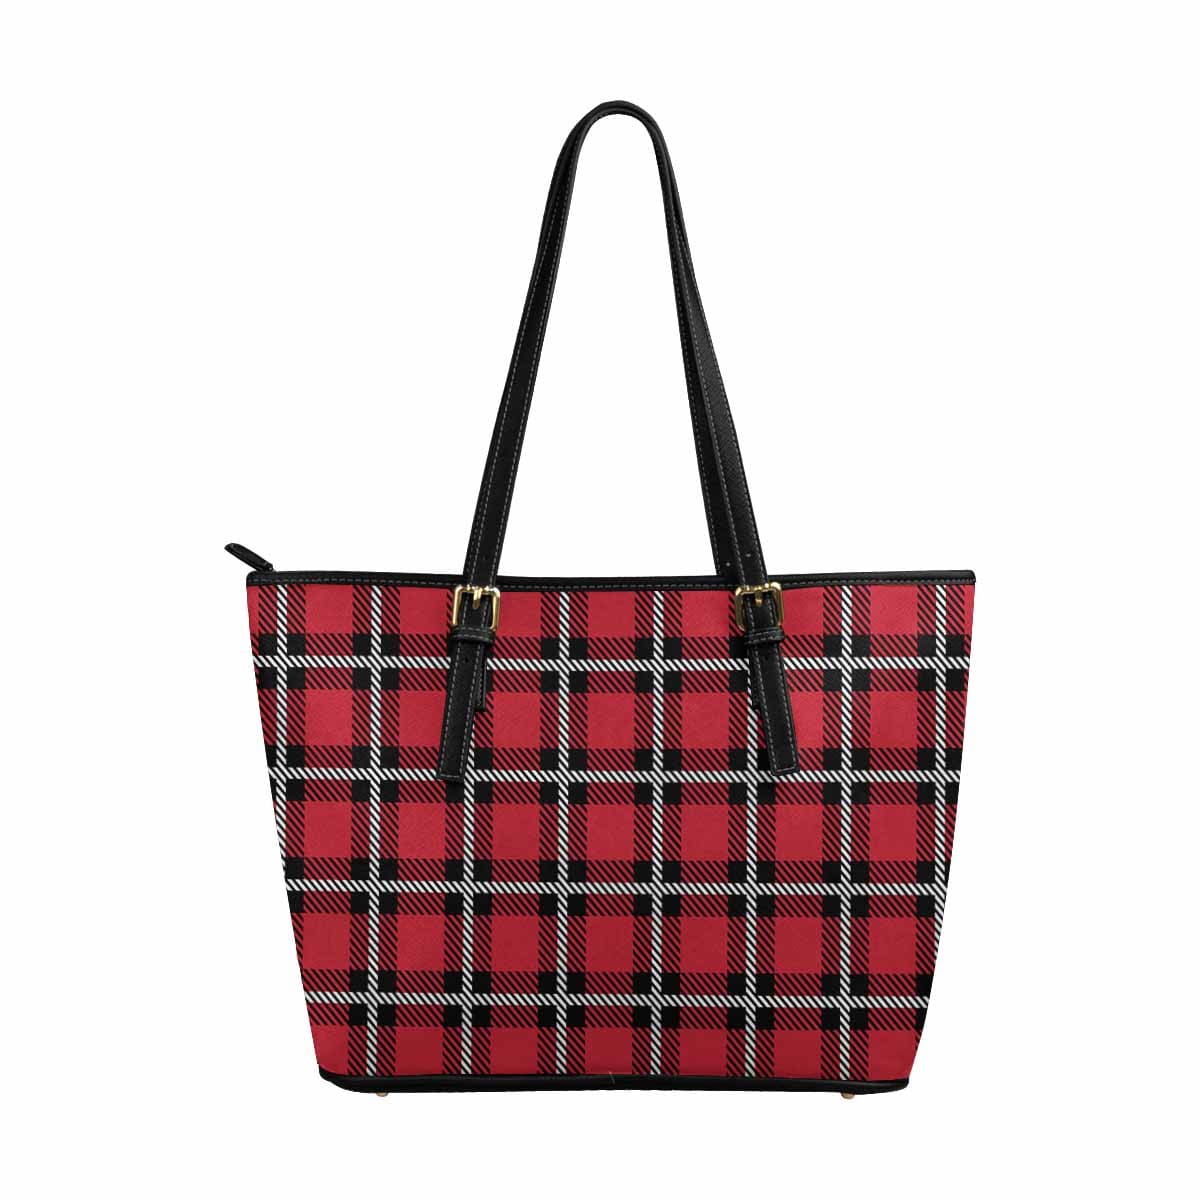 Large Leather Tote Shoulder Bag - Buffalo Plaid Red - Bags | Leather Tote Bags